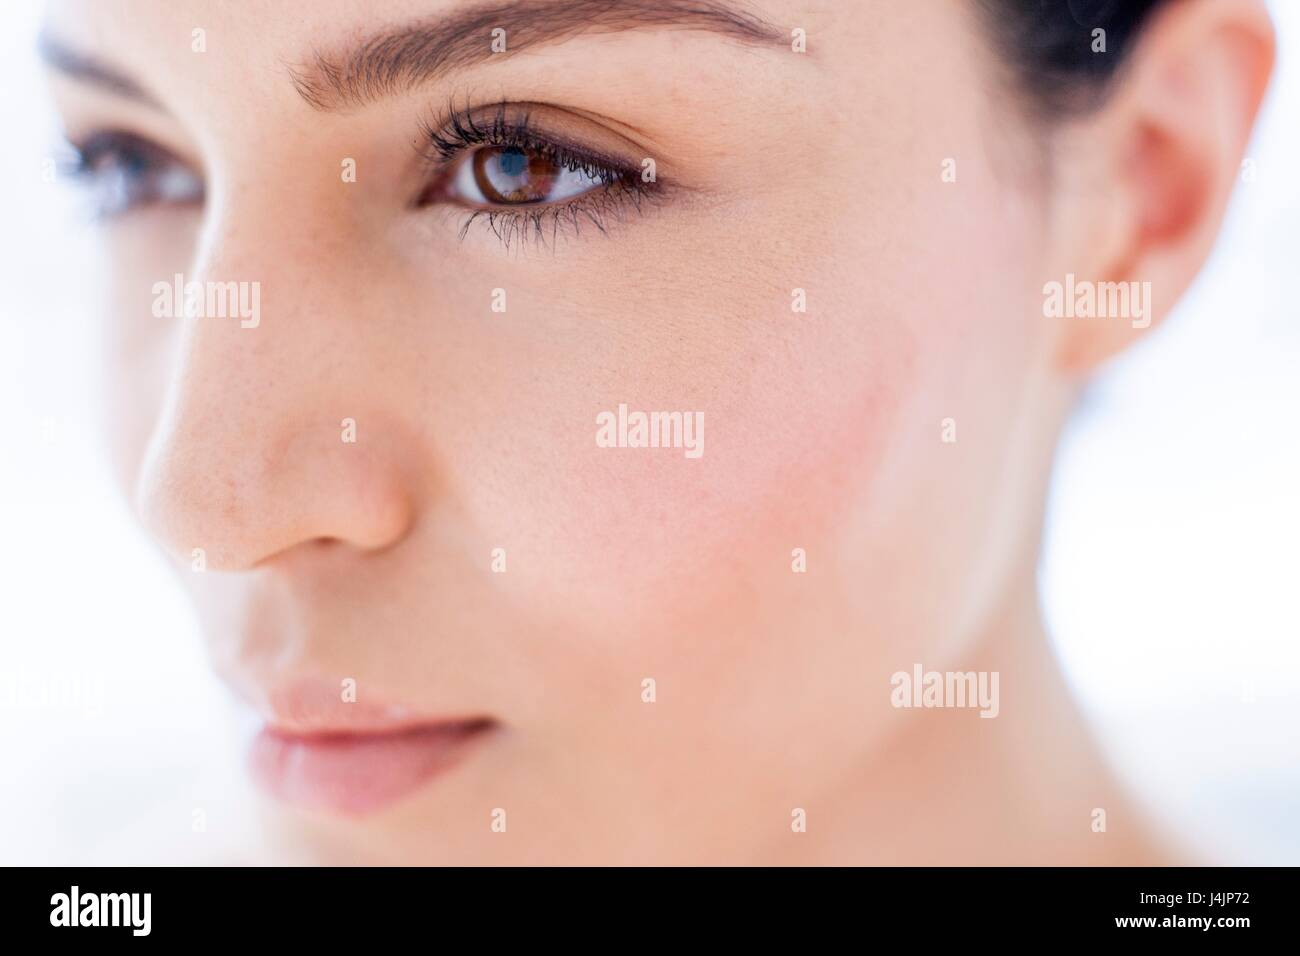 Young woman with brown eyes, close up portrait. Stock Photo